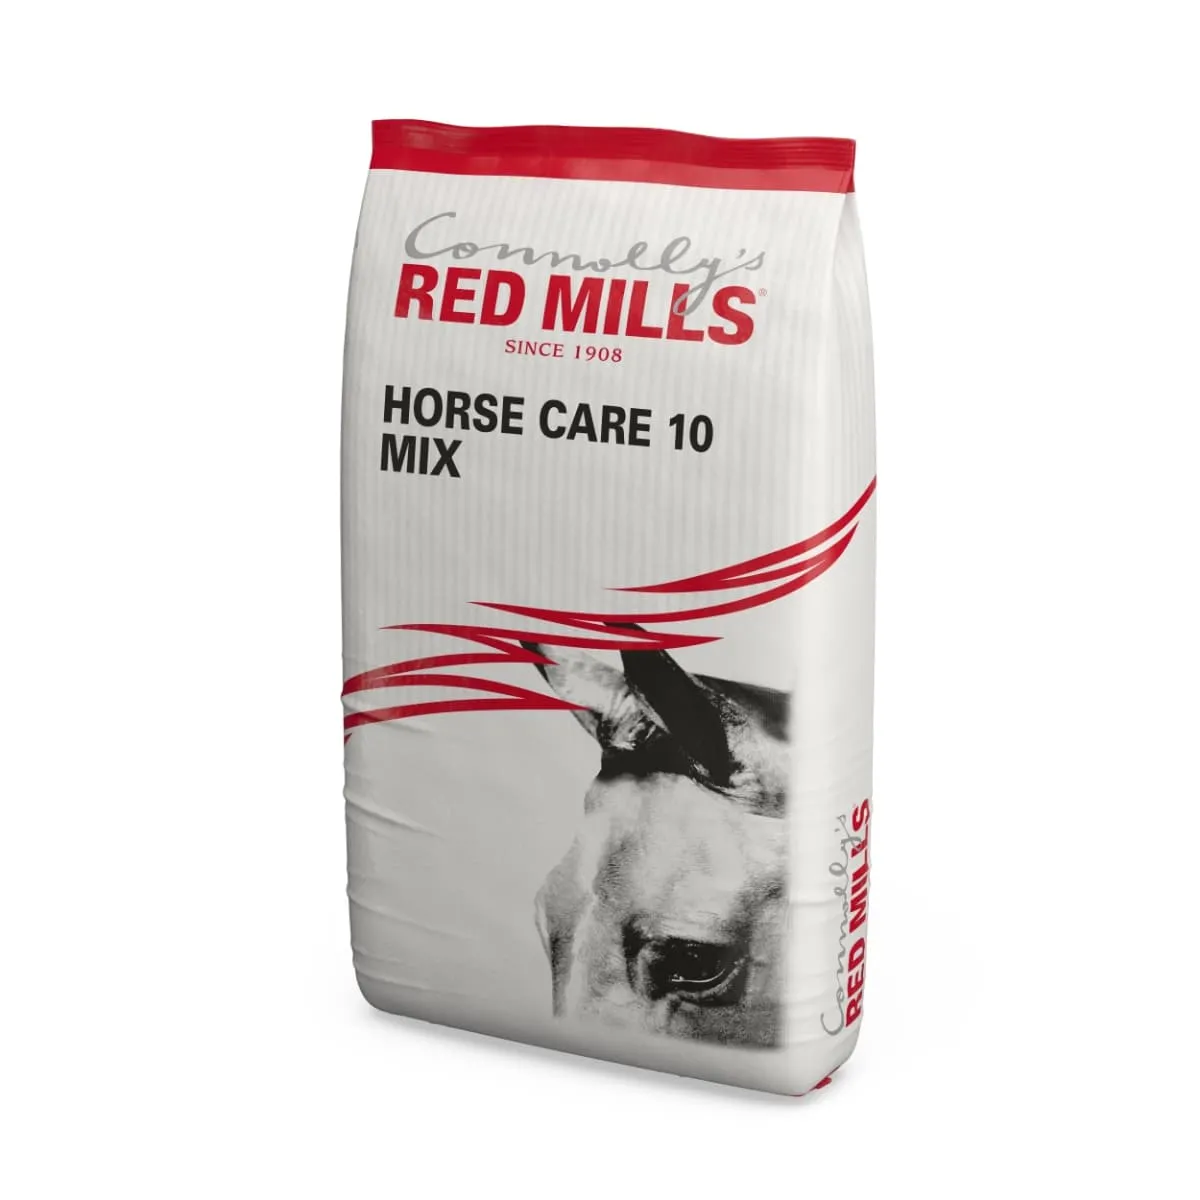 RED MILLS Horse Care 10 Mix